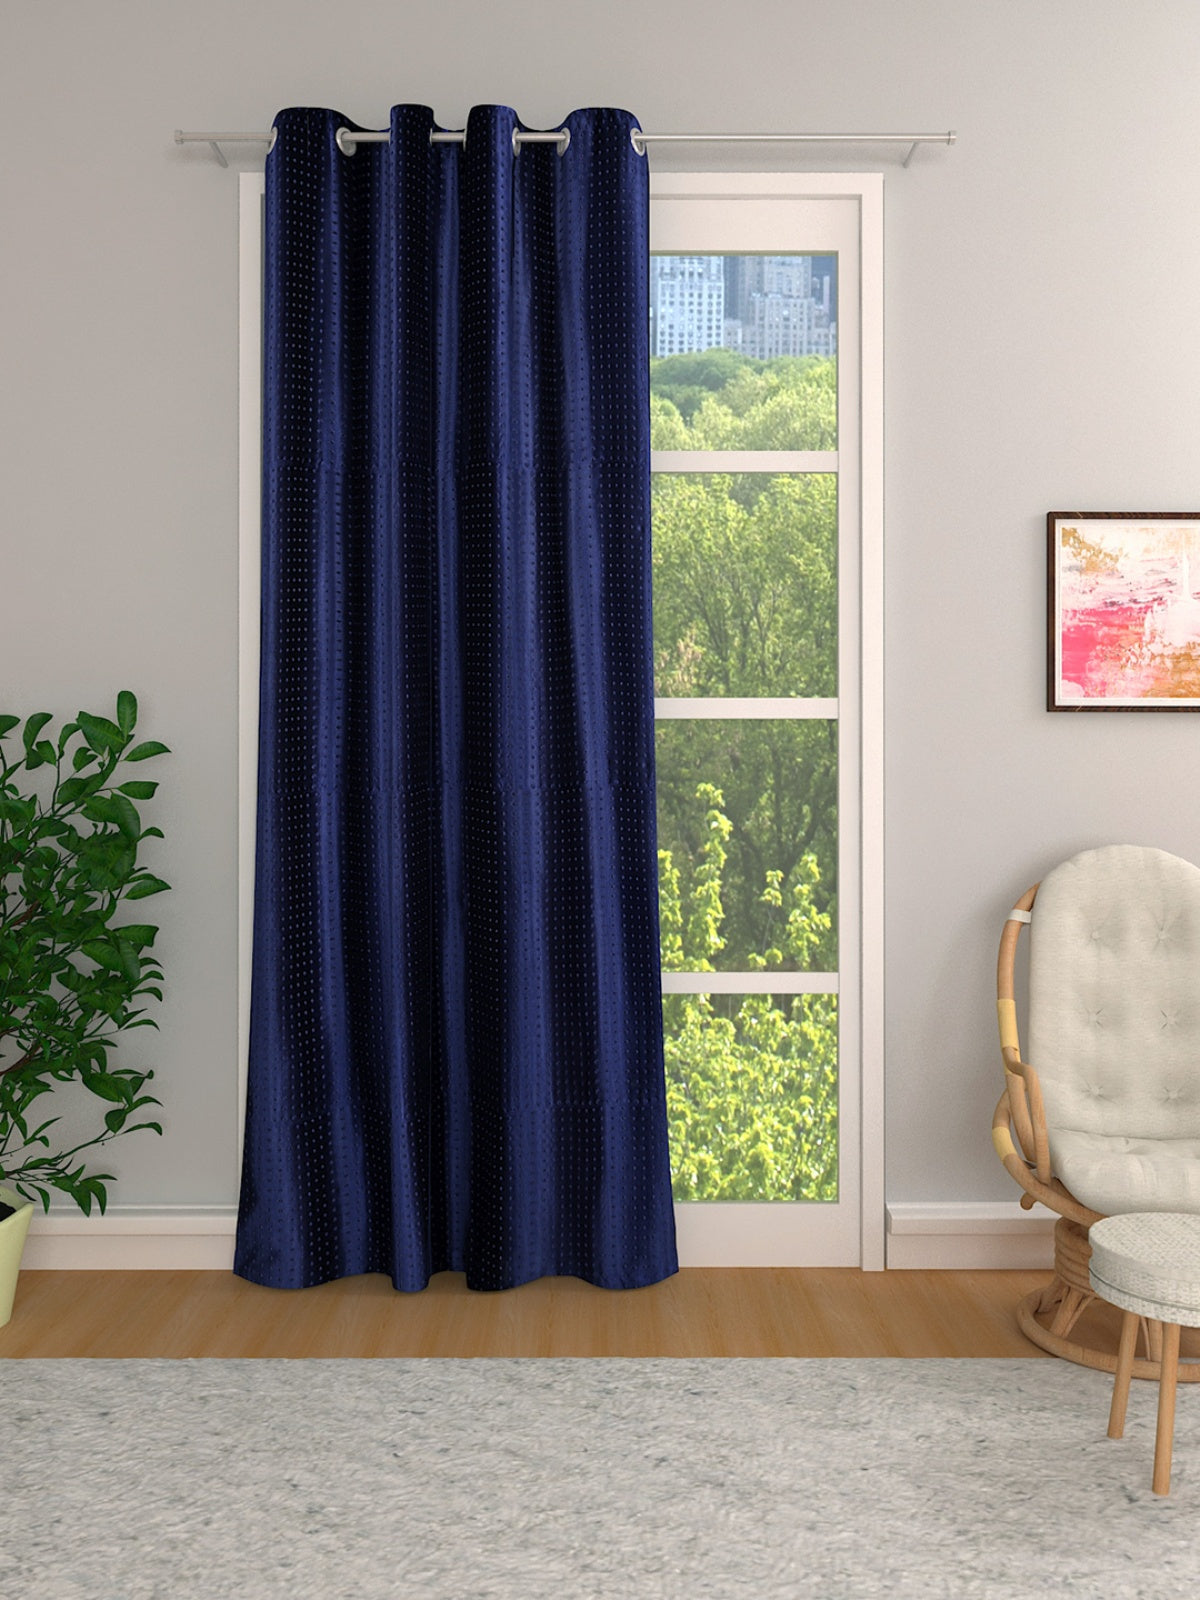 Romee Royal Blue Solid Patterned Set of 1 Door Curtains